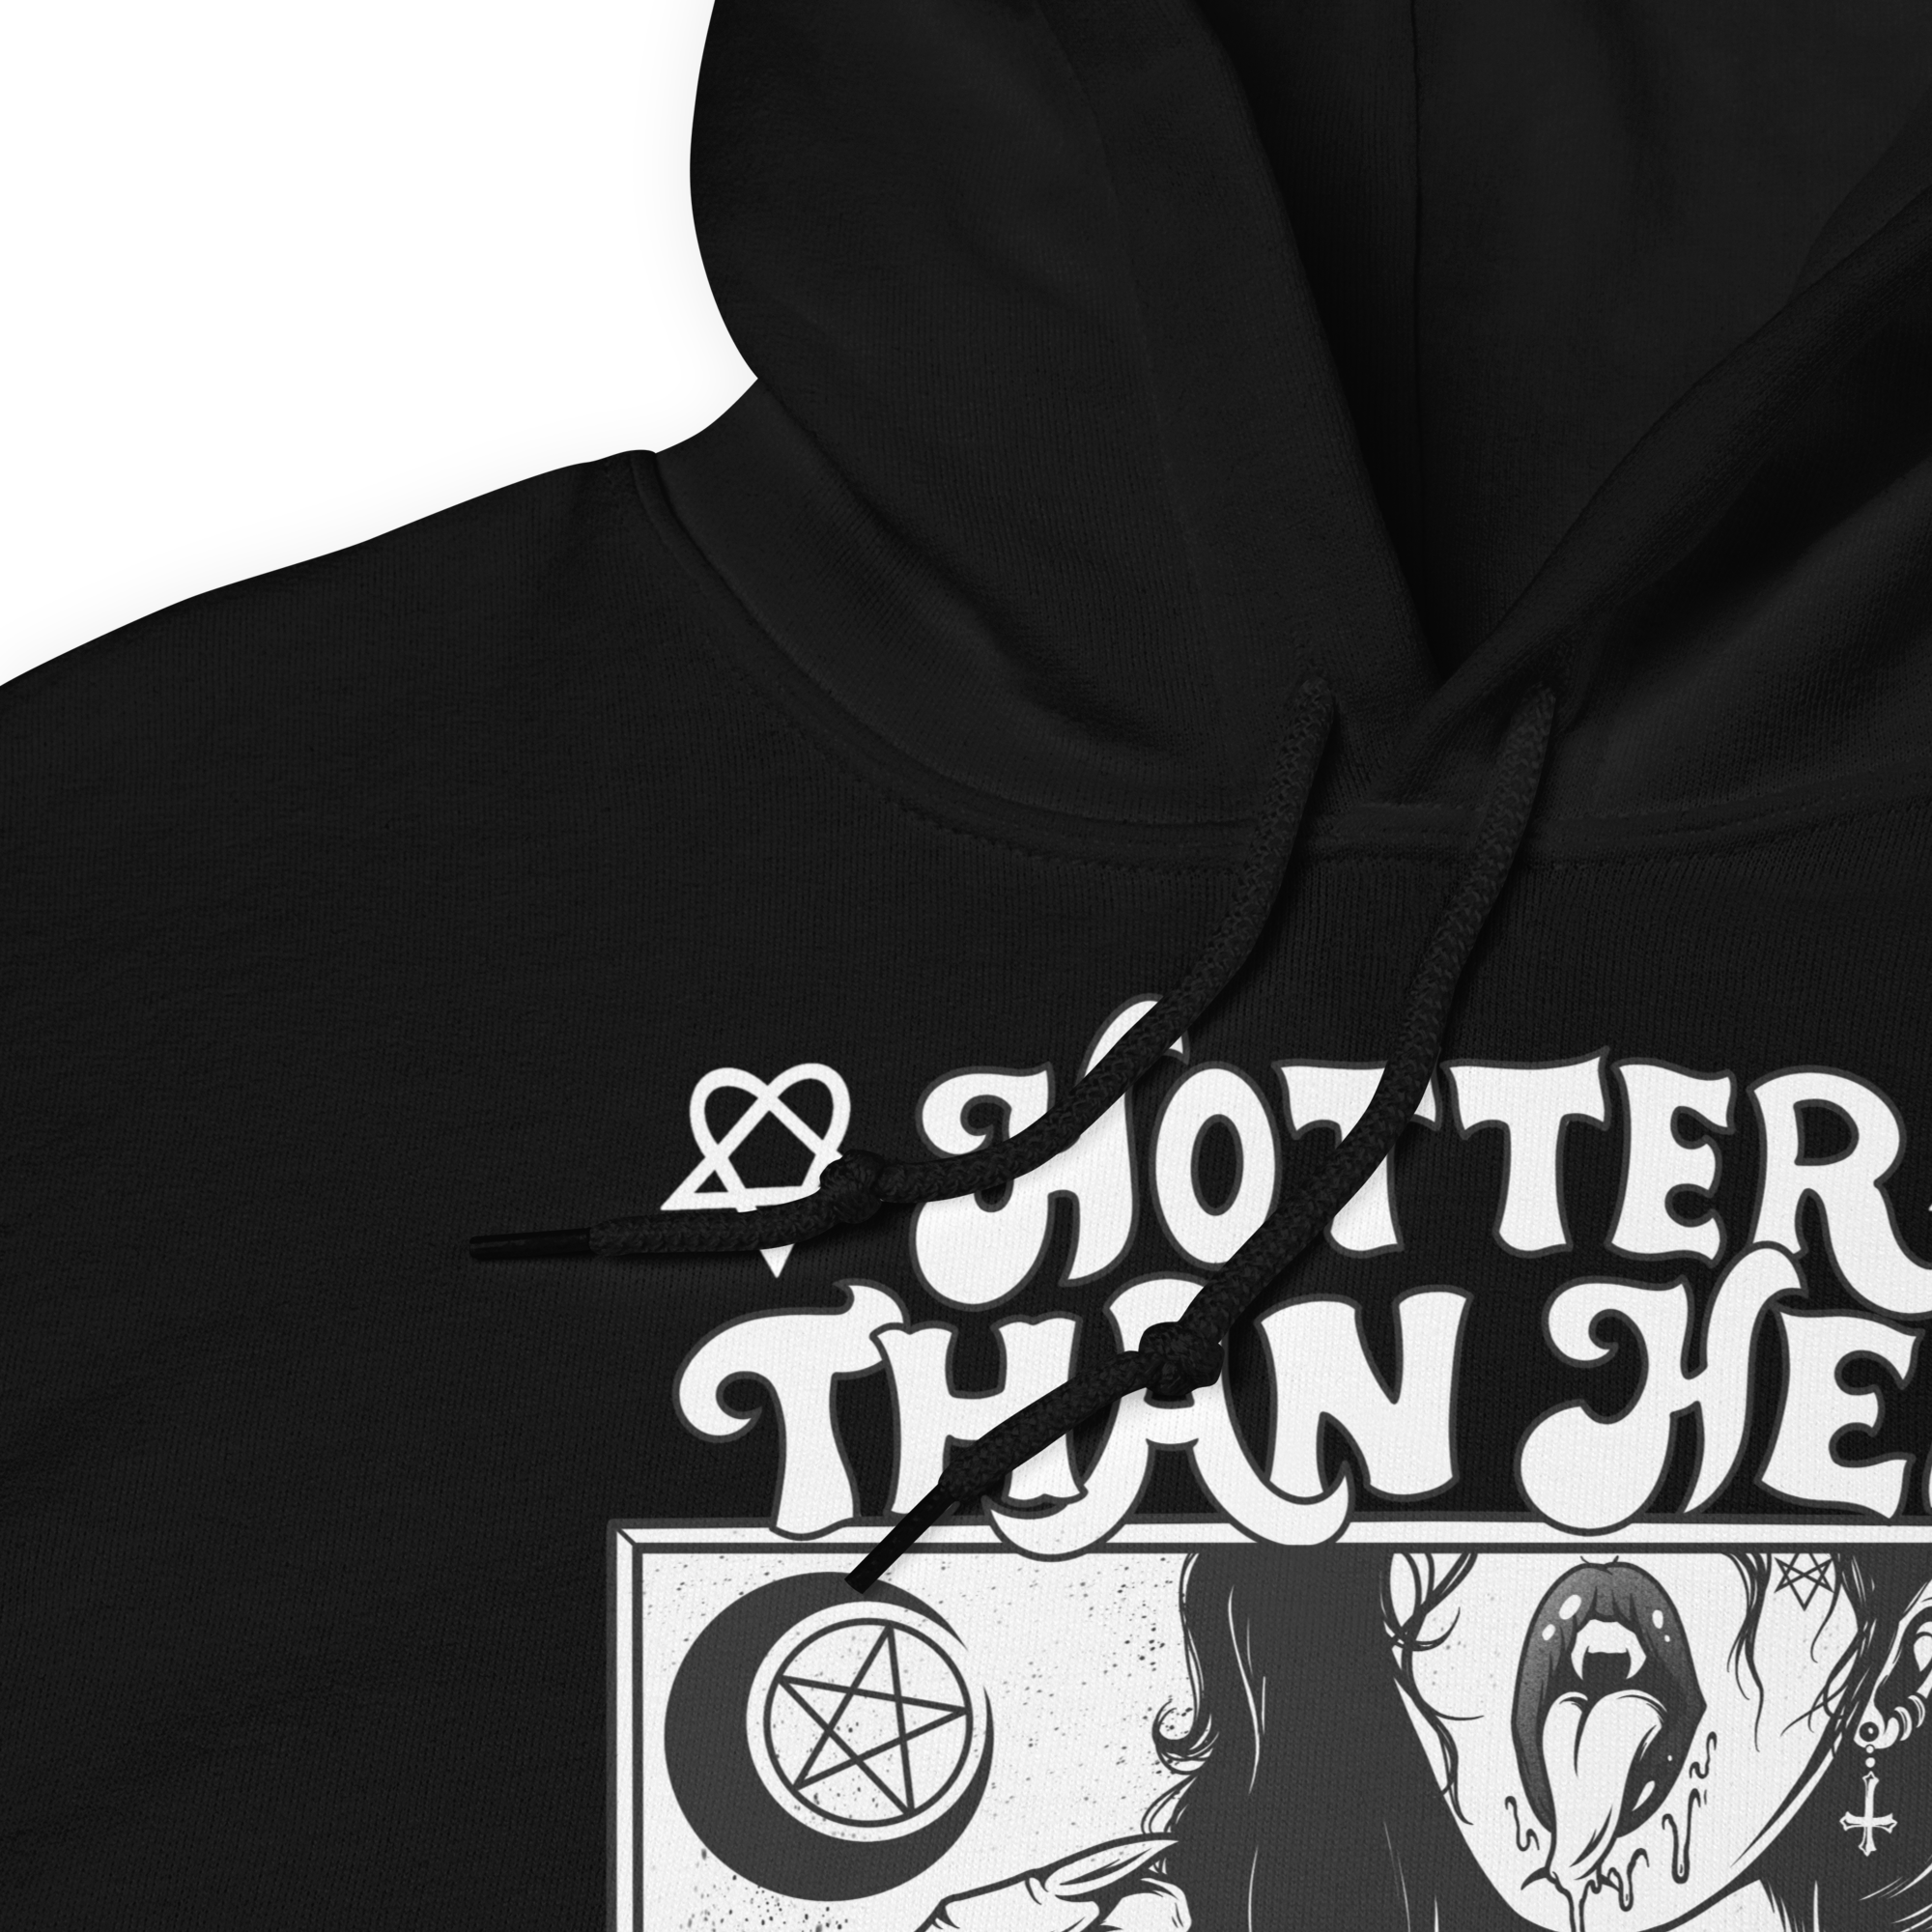 Hotter Than Hell Unisex Hoodie